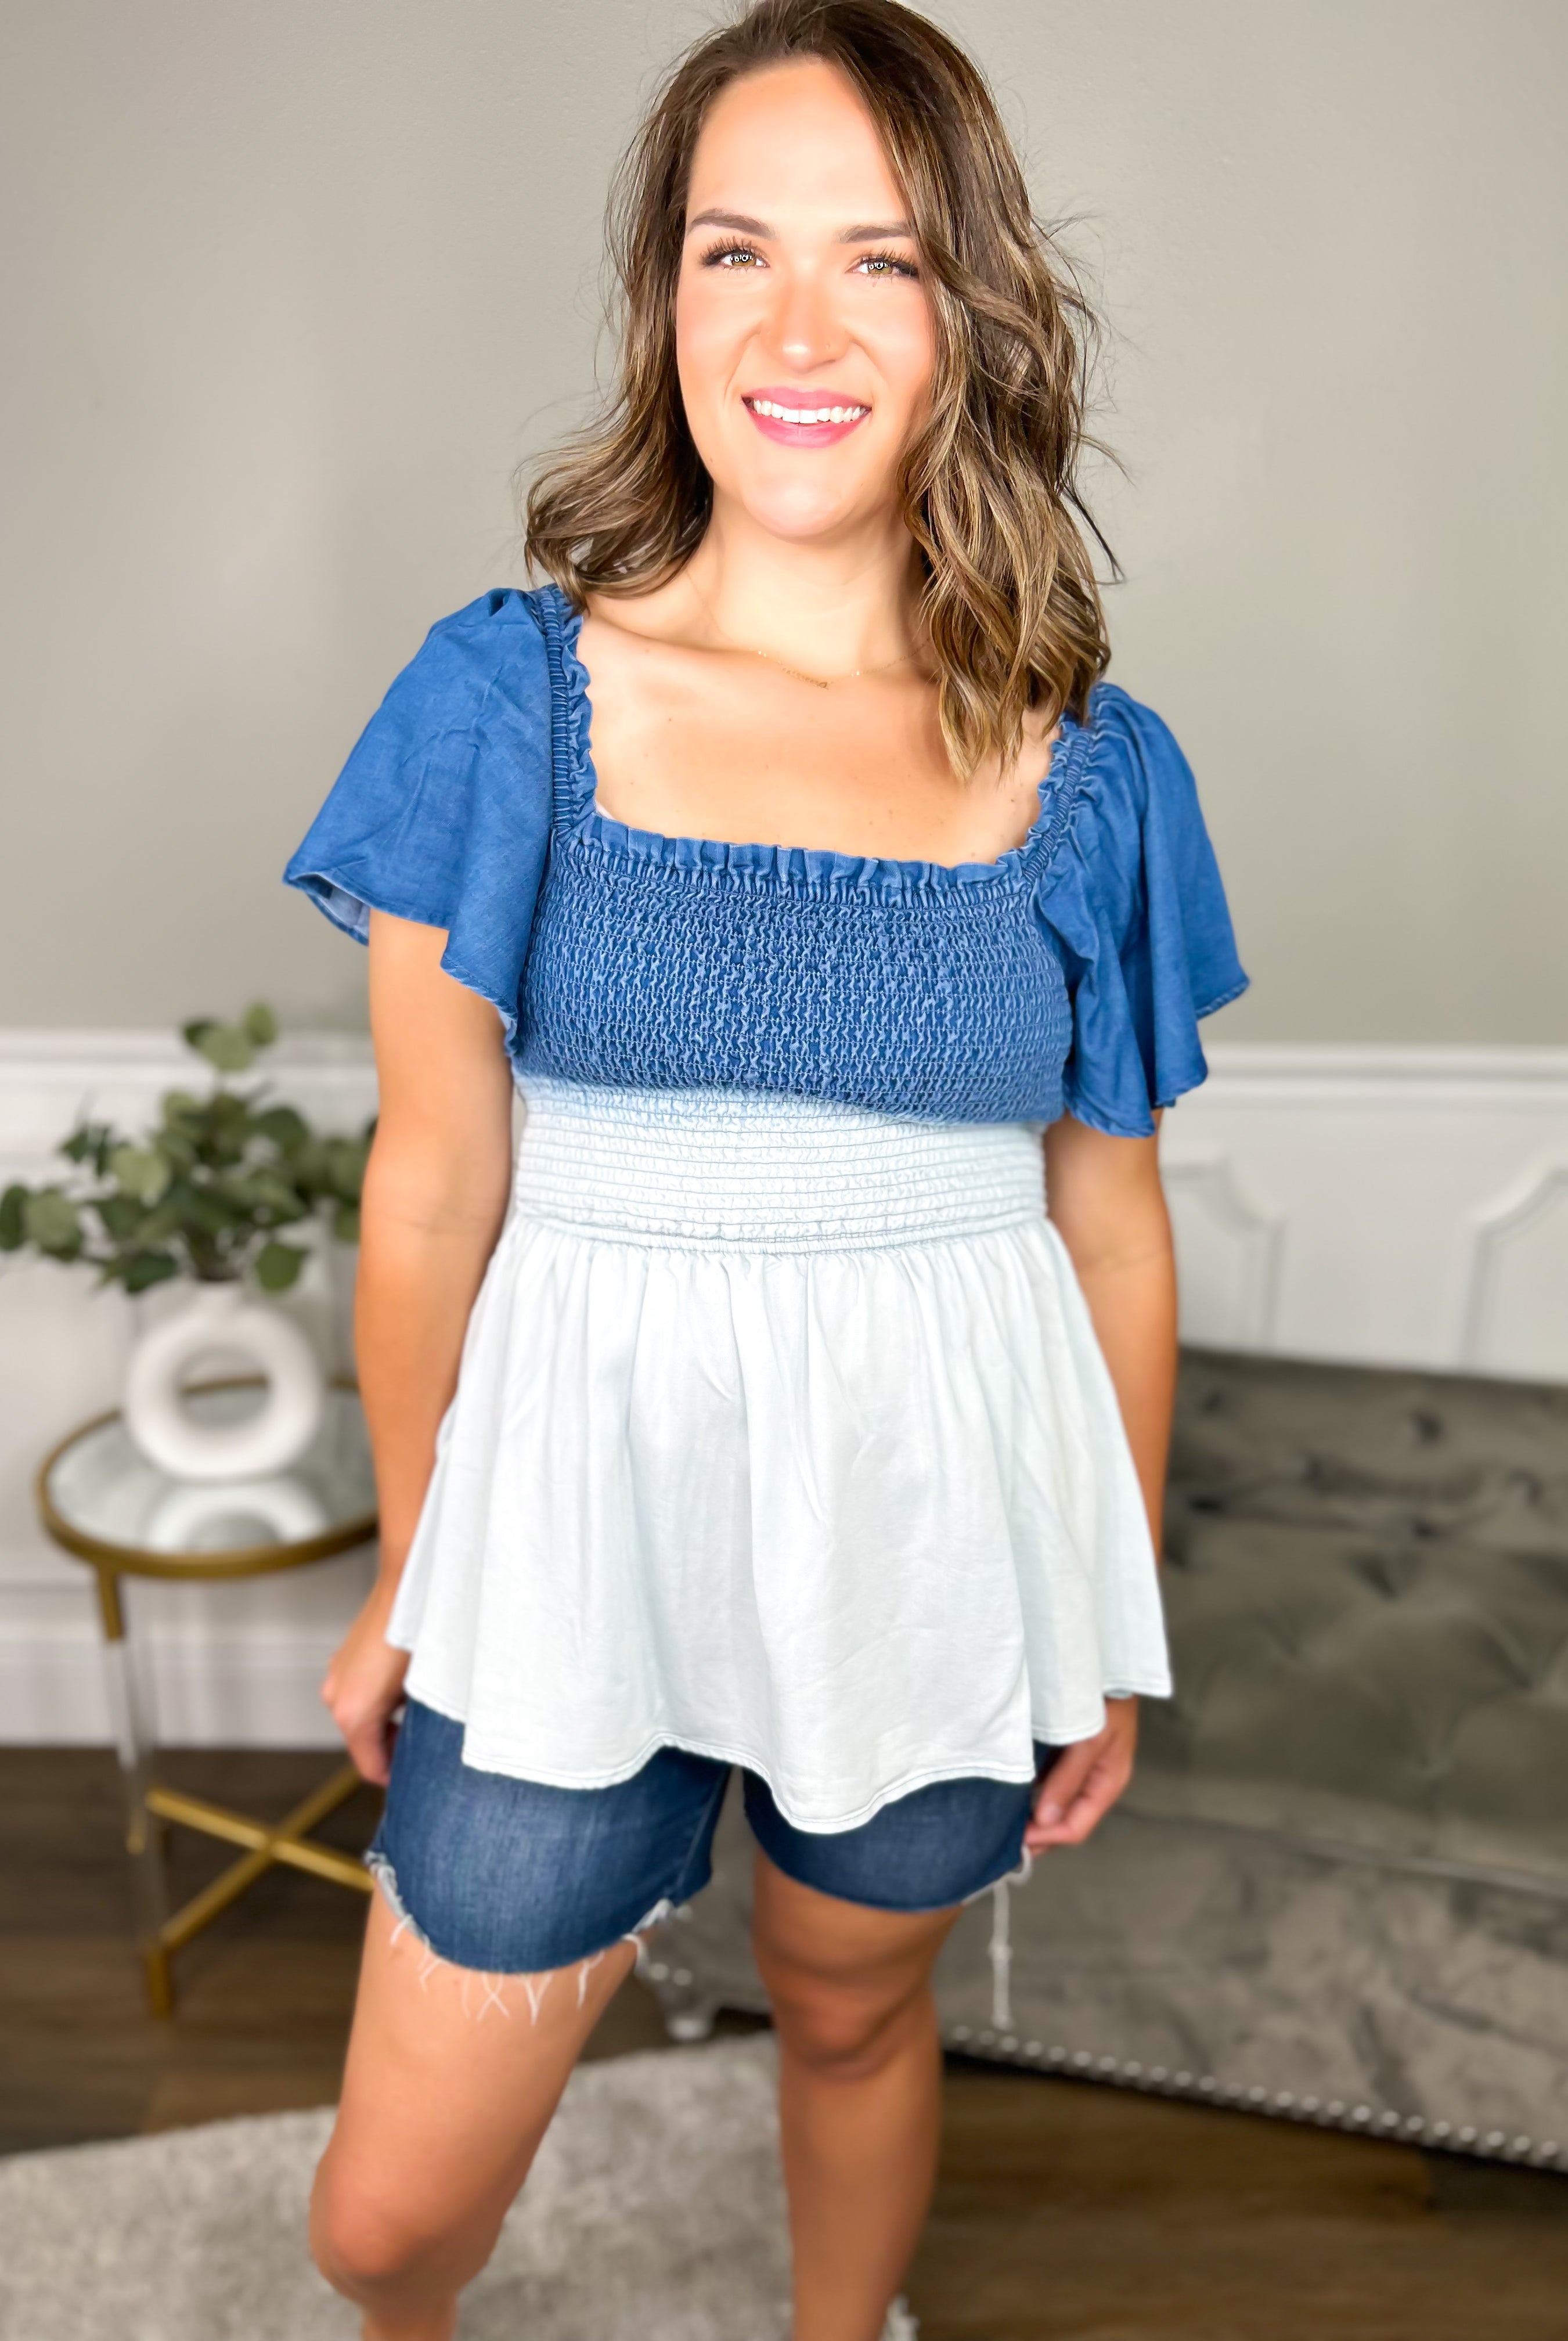 Still Yours Top-110 Short Sleeve Top-White Birch-Heathered Boho Boutique, Women's Fashion and Accessories in Palmetto, FL